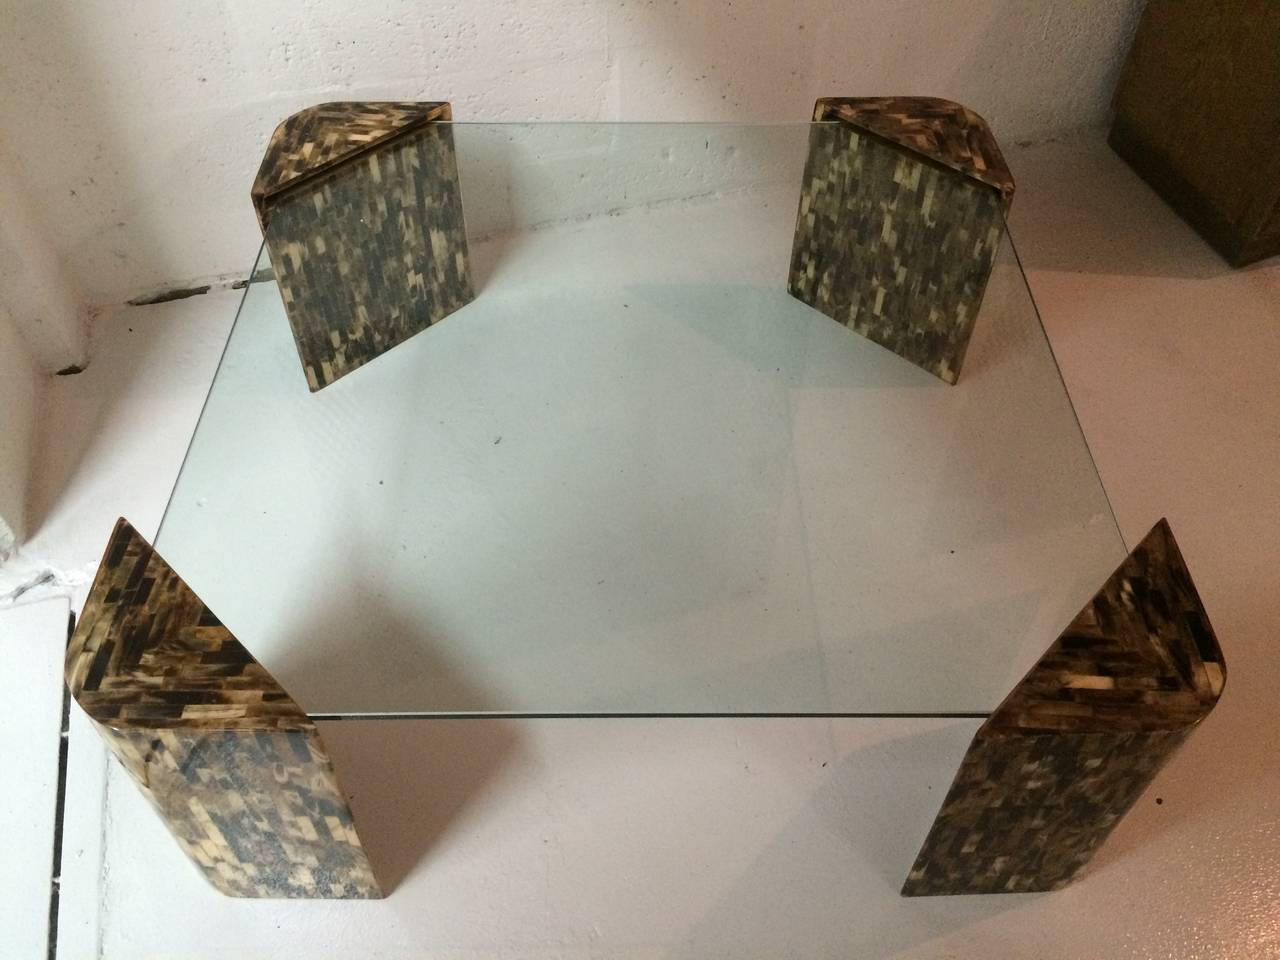 Tessellated Horn coffee, cocktail table by Enrique Garcel. Can use current glass or have custom size glass cut to make this table any size.